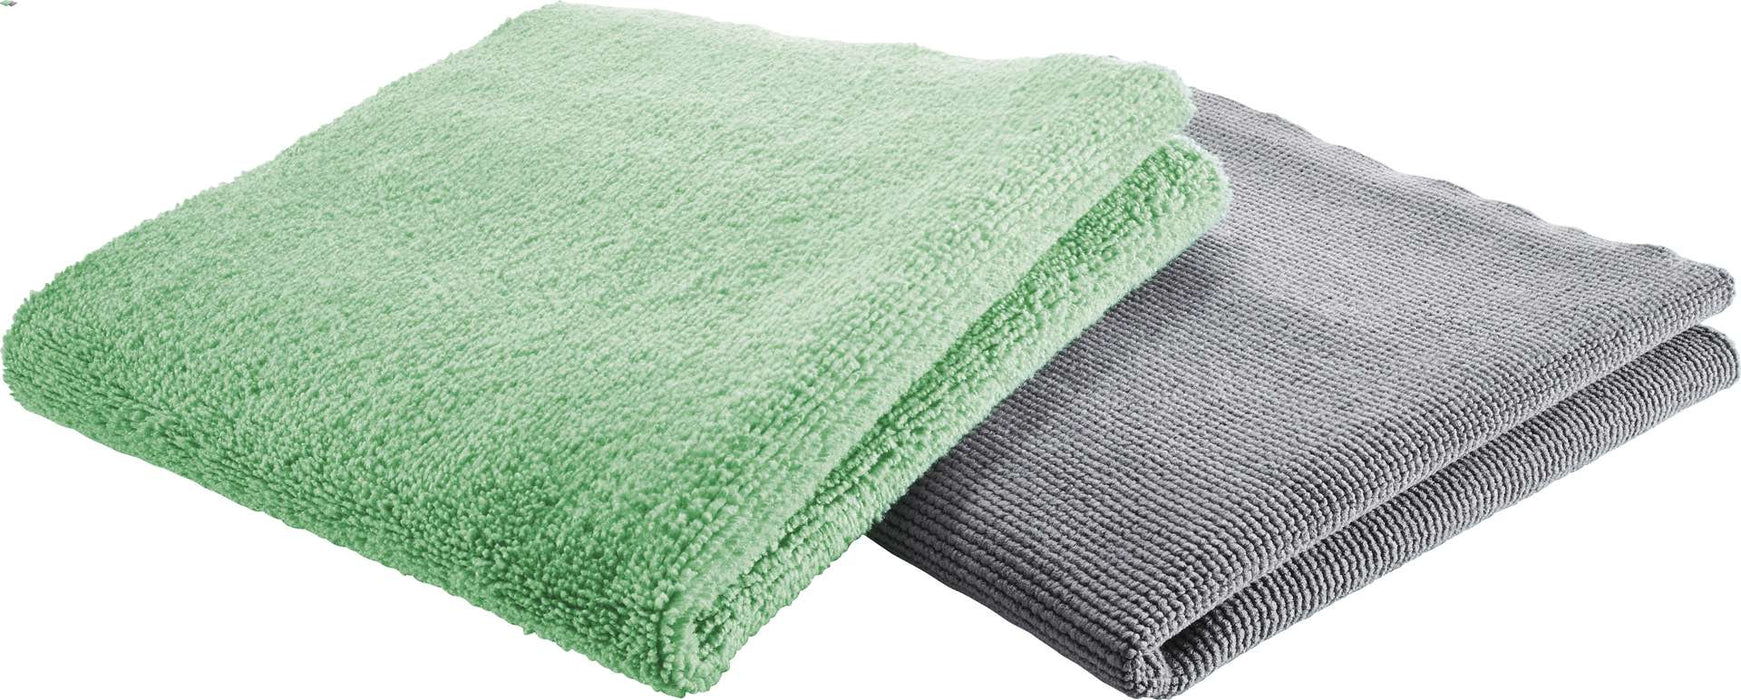 Microfibre Cleaning Cloth - 2 Pack